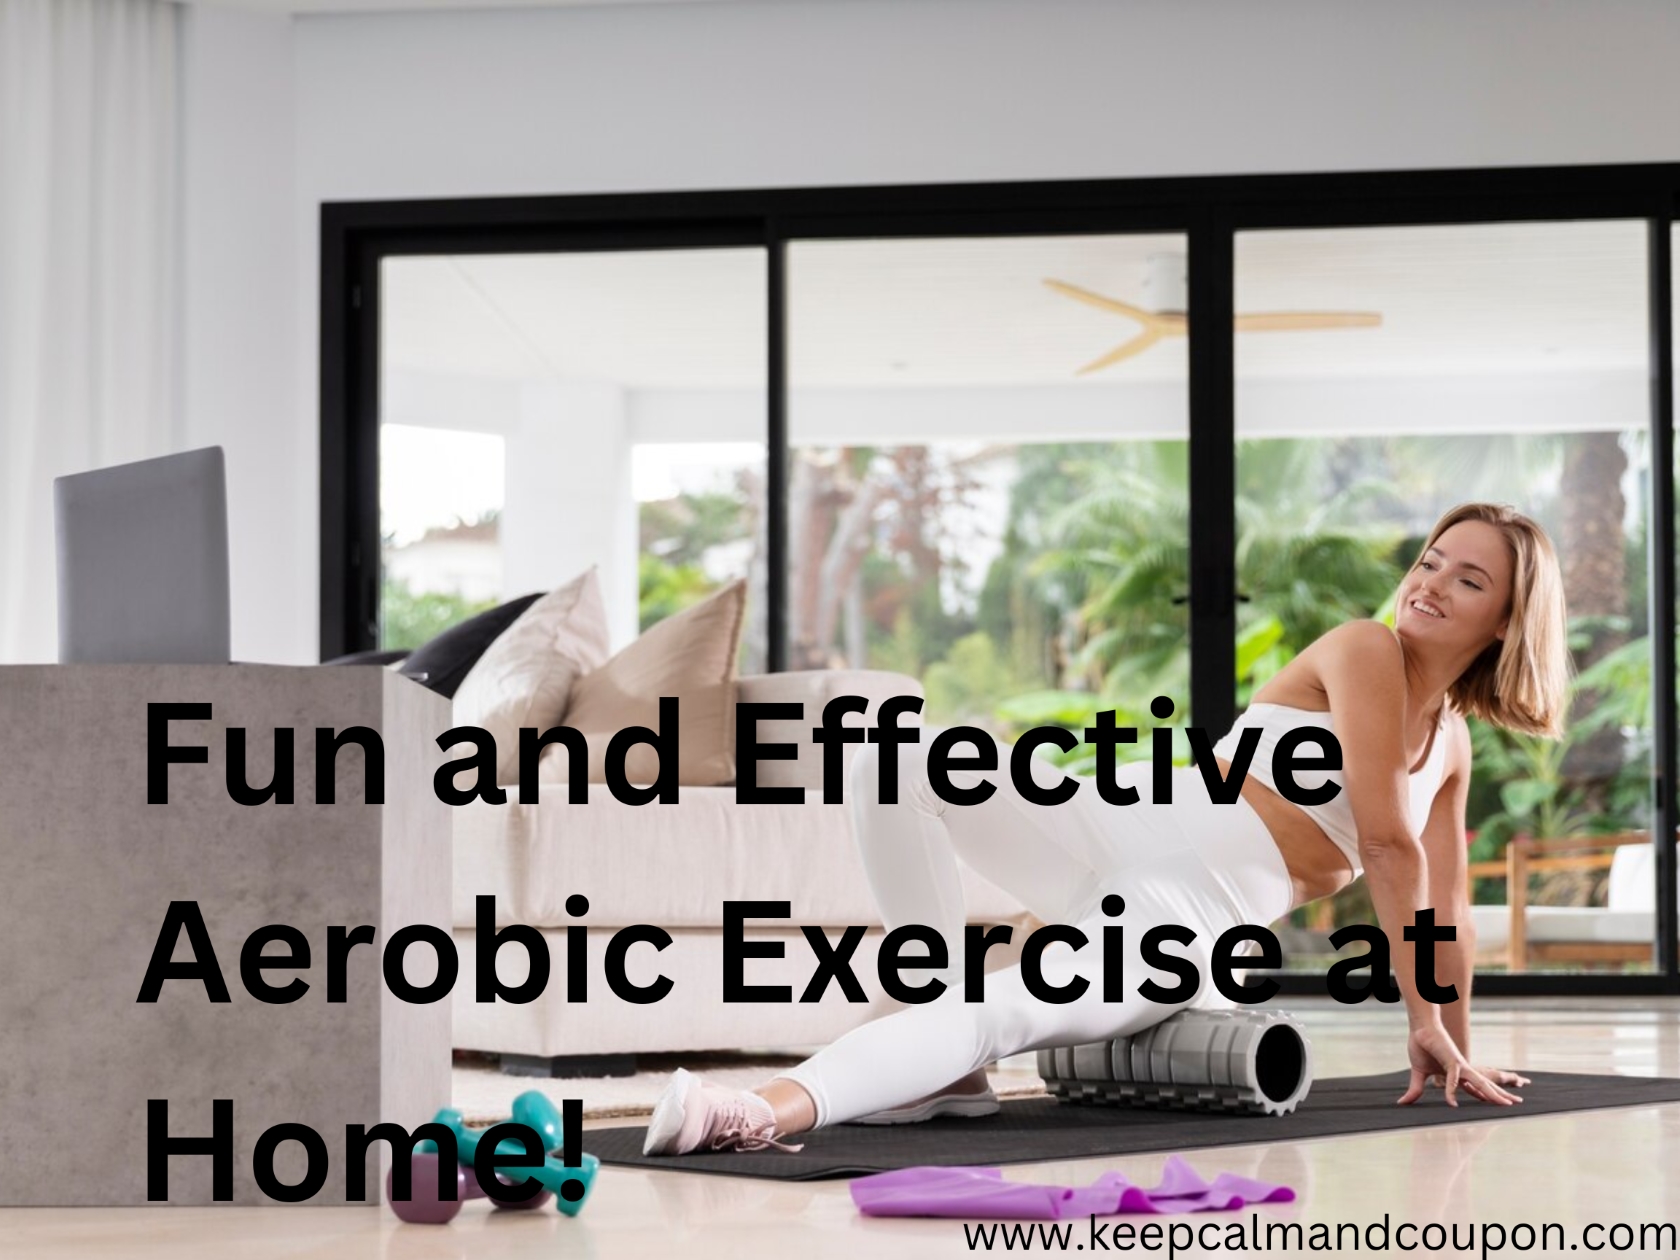 Fun and Effective Aerobic Exercise at Home!